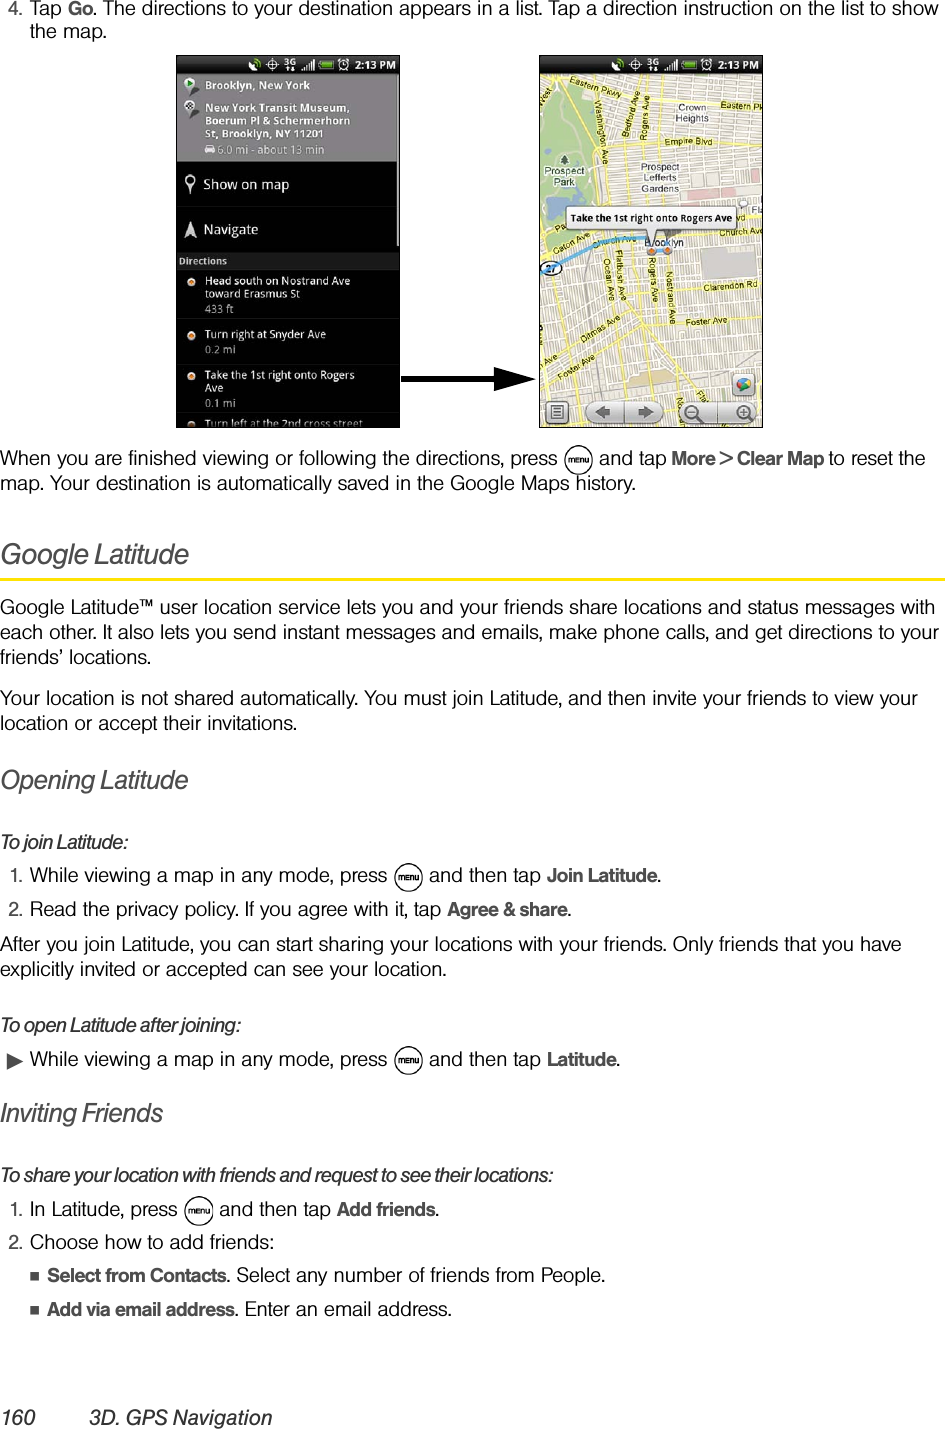 160 3D. GPS Navigation4. Tap Go. The directions to your destination appears in a list. Tap a direction instruction on the list to show the map.When you are finished viewing or following the directions, press   and tap More &gt; Clear Map to reset the map. Your destination is automatically saved in the Google Maps history.Google LatitudeGoogle Latitude™ user location service lets you and your friends share locations and status messages with each other. It also lets you send instant messages and emails, make phone calls, and get directions to your friends’ locations.Your location is not shared automatically. You must join Latitude, and then invite your friends to view your location or accept their invitations. Opening LatitudeTo join Latitude:1. While viewing a map in any mode, press   and then tap Join Latitude.2. Read the privacy policy. If you agree with it, tap Agree &amp; share. After you join Latitude, you can start sharing your locations with your friends. Only friends that you have explicitly invited or accepted can see your location. To open Latitude after joining:ᮣWhile viewing a map in any mode, press   and then tap Latitude.Inviting FriendsTo share your location with friends and request to see their locations:1. In Latitude, press   and then tap Add friends.2. Choose how to add friends: ⅢSelect from Contacts. Select any number of friends from People.ⅢAdd via email address. Enter an email address.